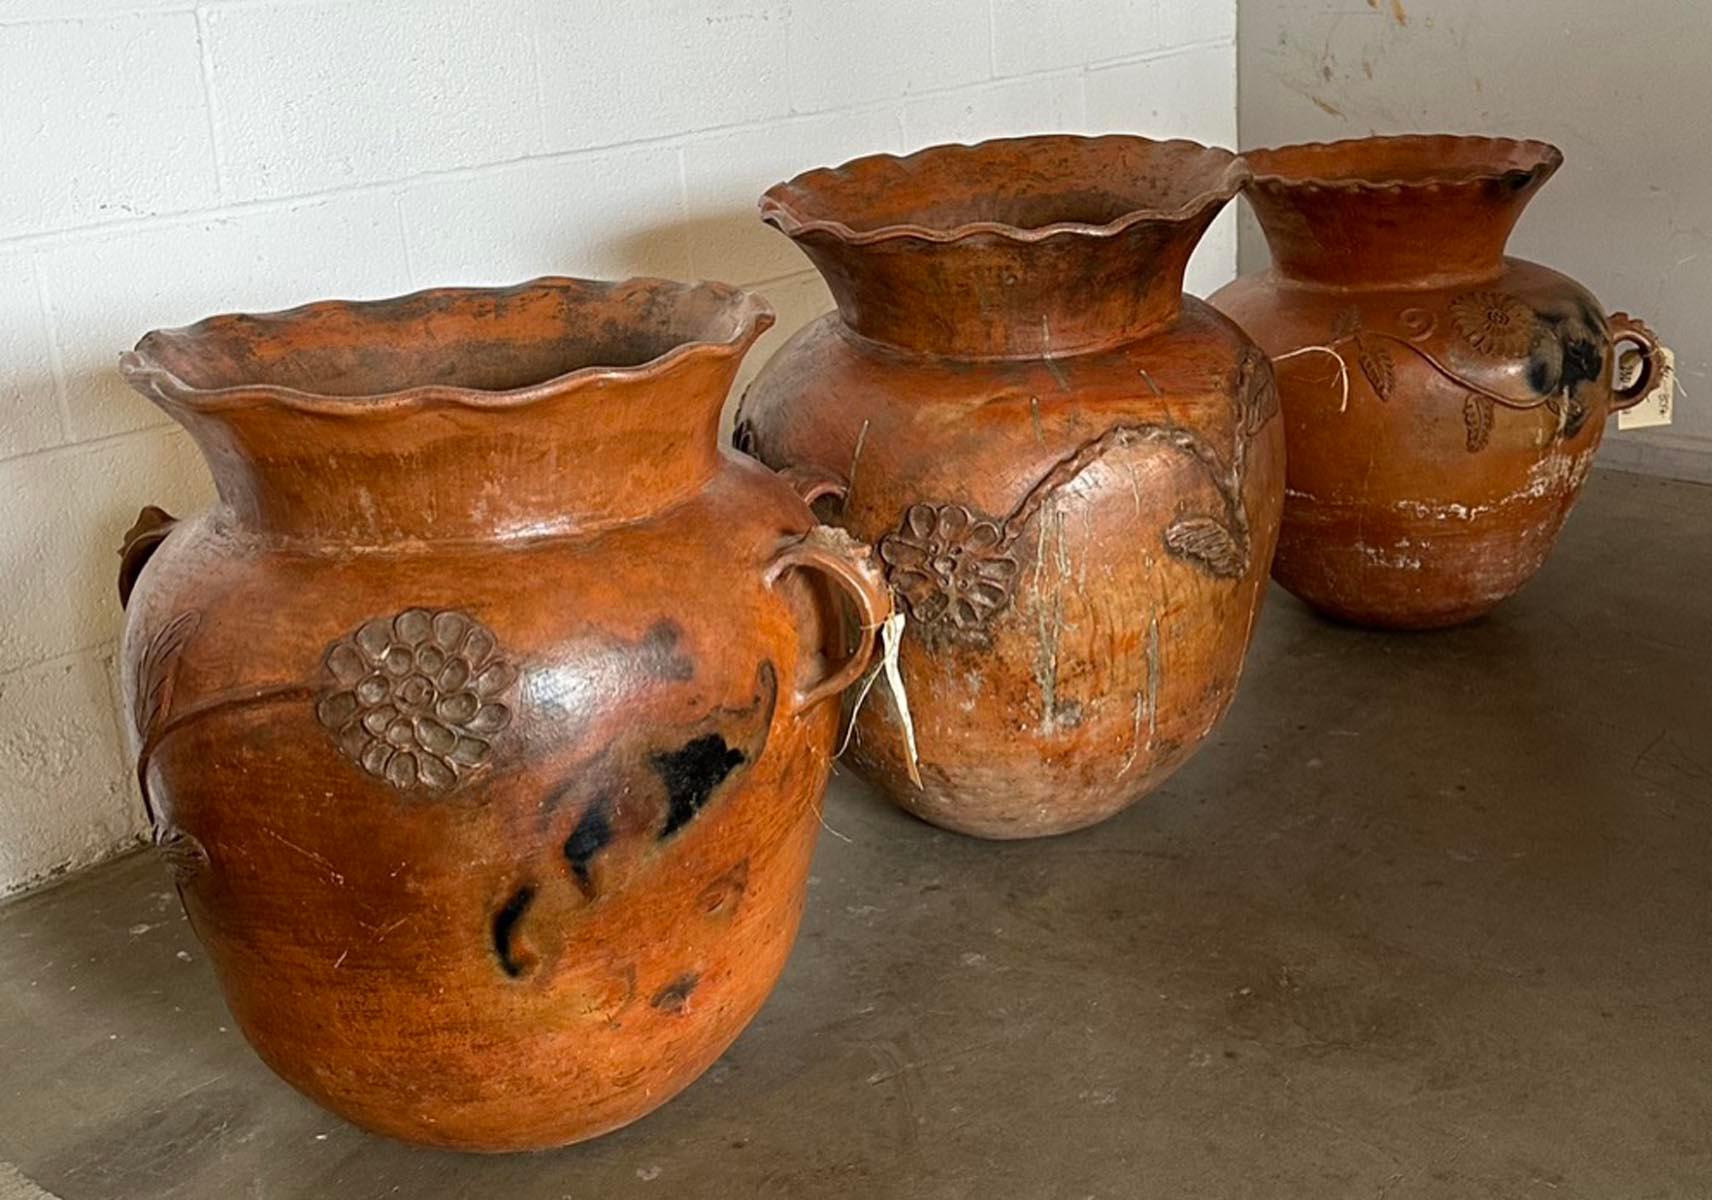 clay pot for water storage